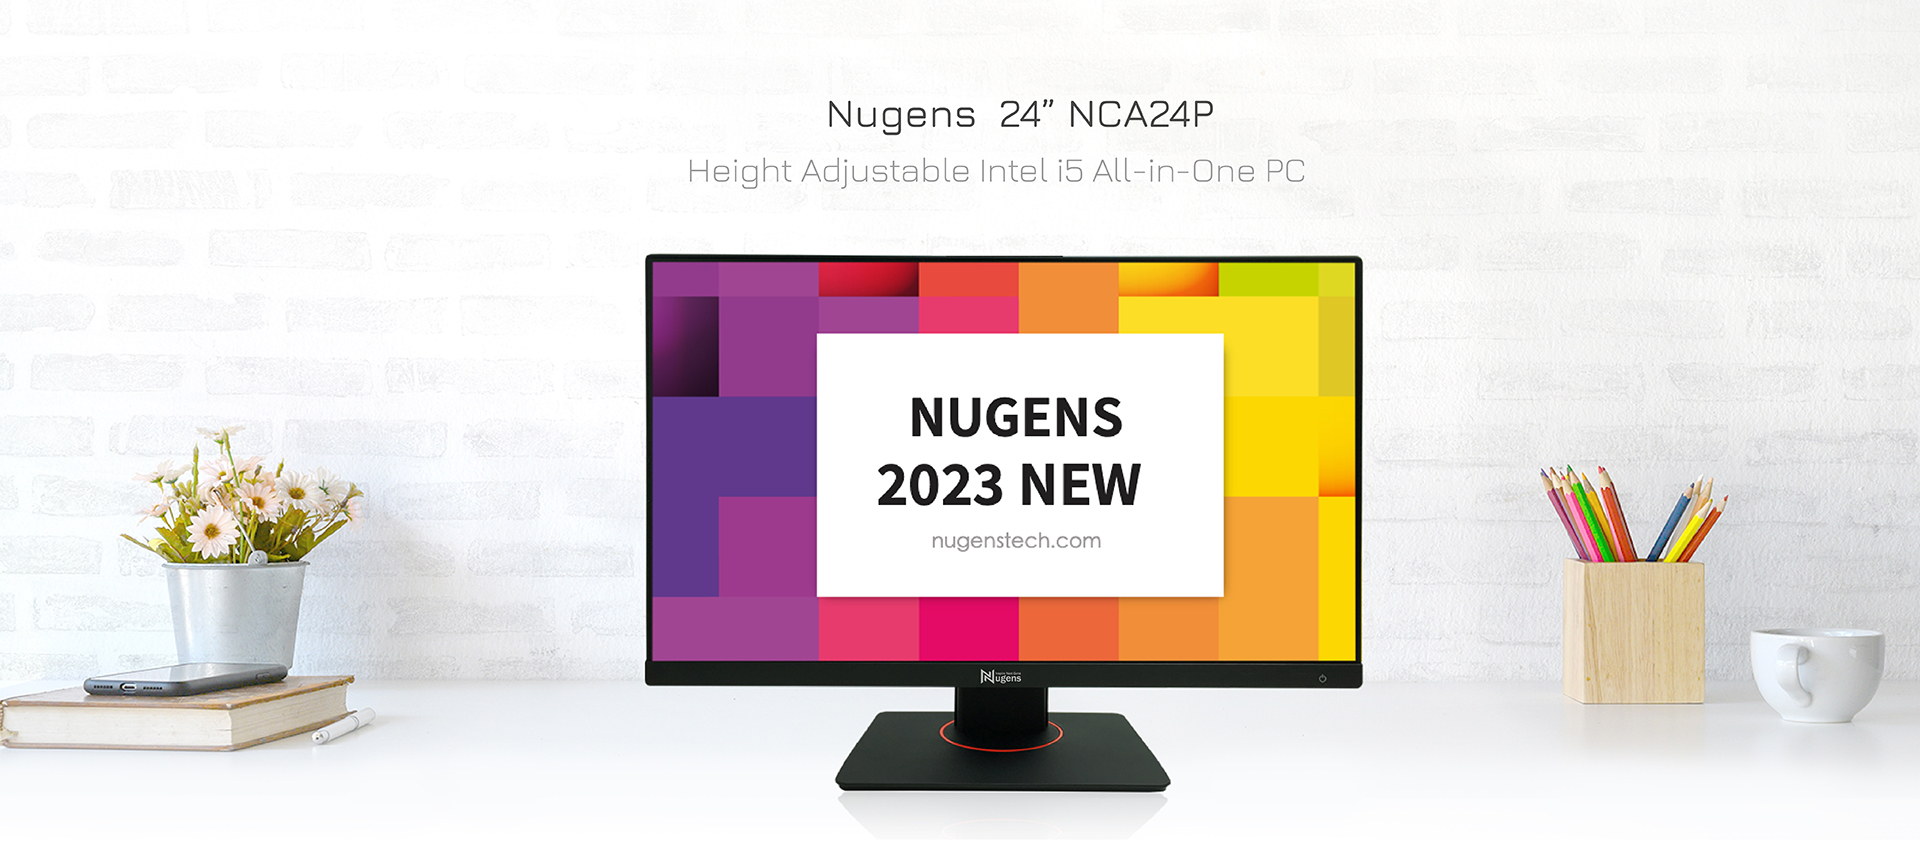 Nugens  Height Adjustable Intel i5 All-in-One PC 